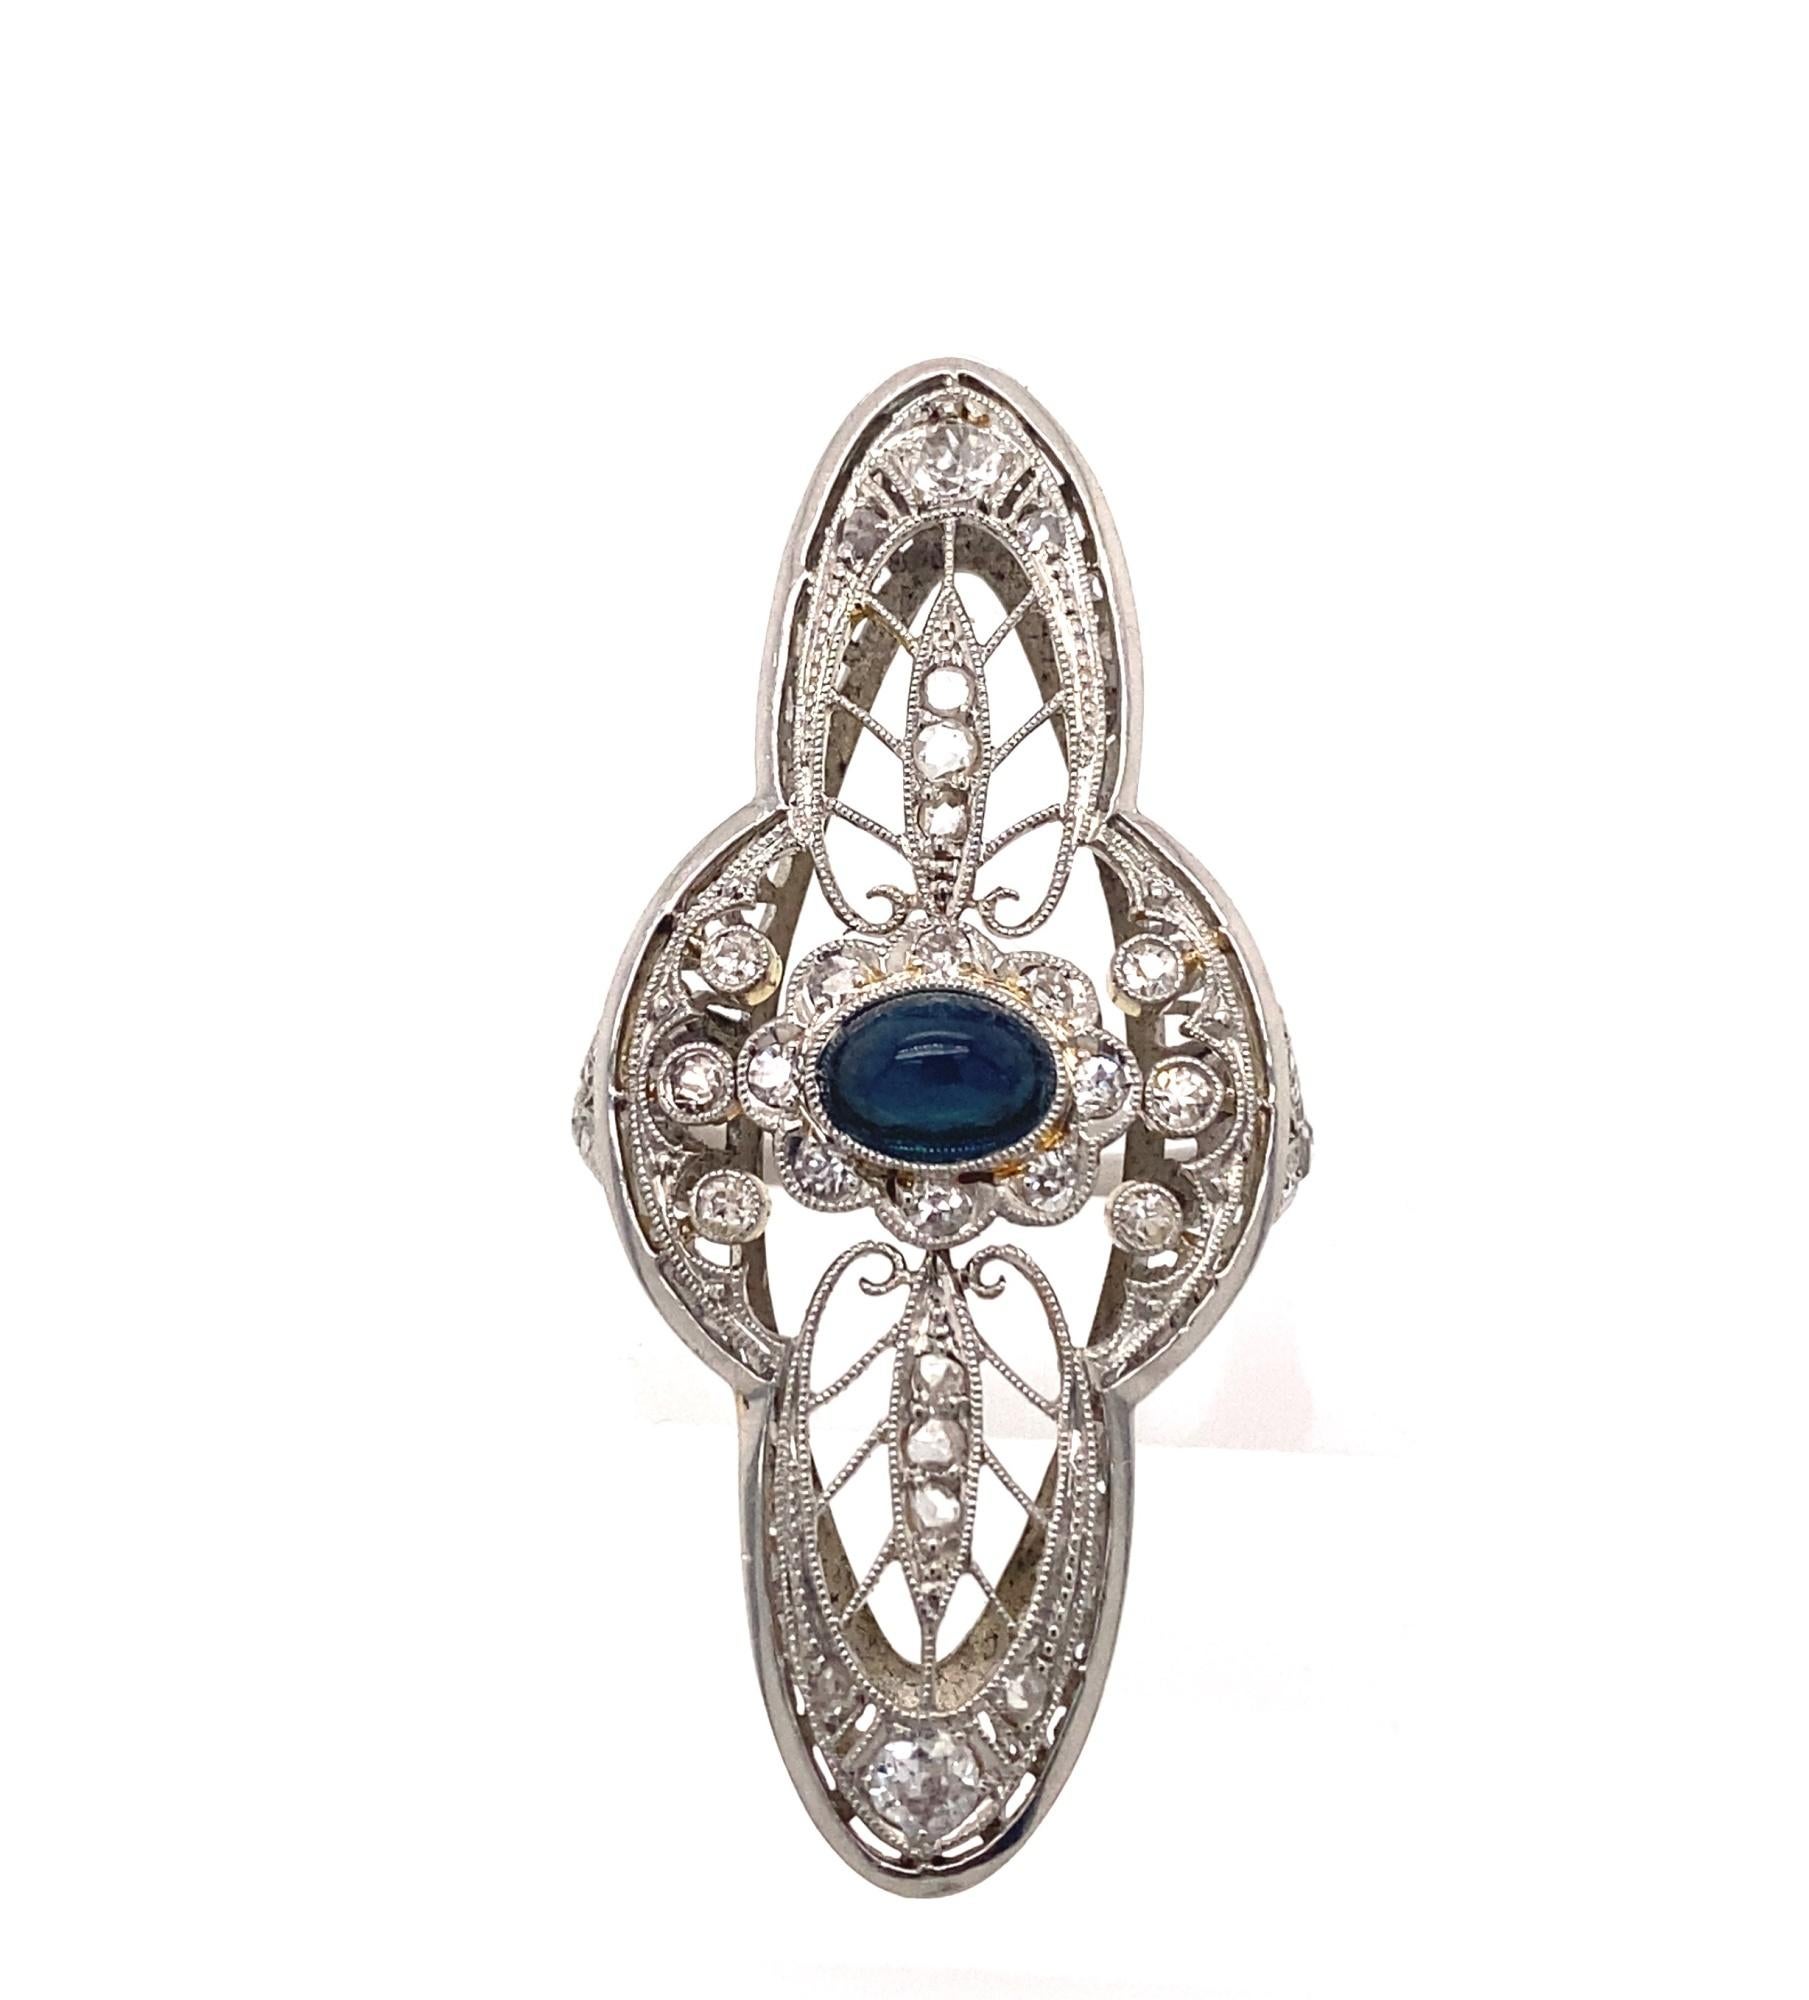 This is an amazing large late art deco ring set with an intricate filigree design. The ring is set with old mine and rose cuts diamonds and a cabochon blue sapphire.  The sapphire has amazing deep blue color and clarity approximately 1 carat.  There